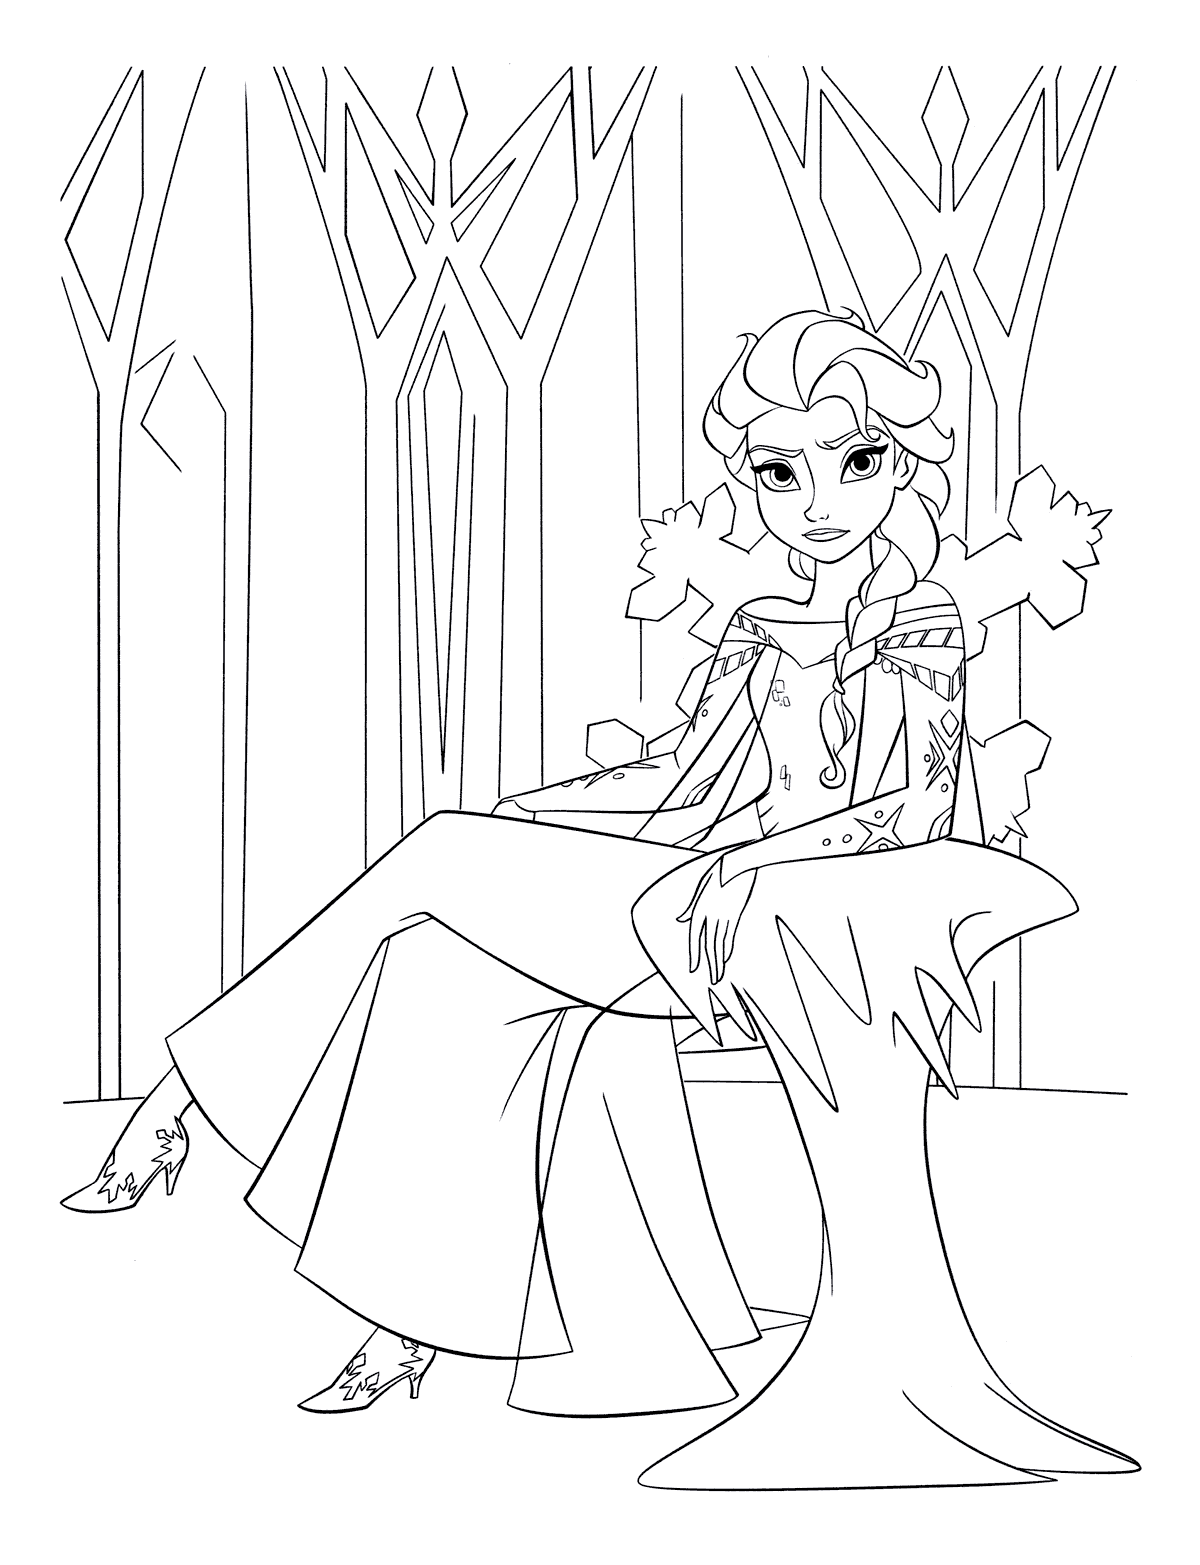 Download Coloring page - Queen Elsa of Arendelle